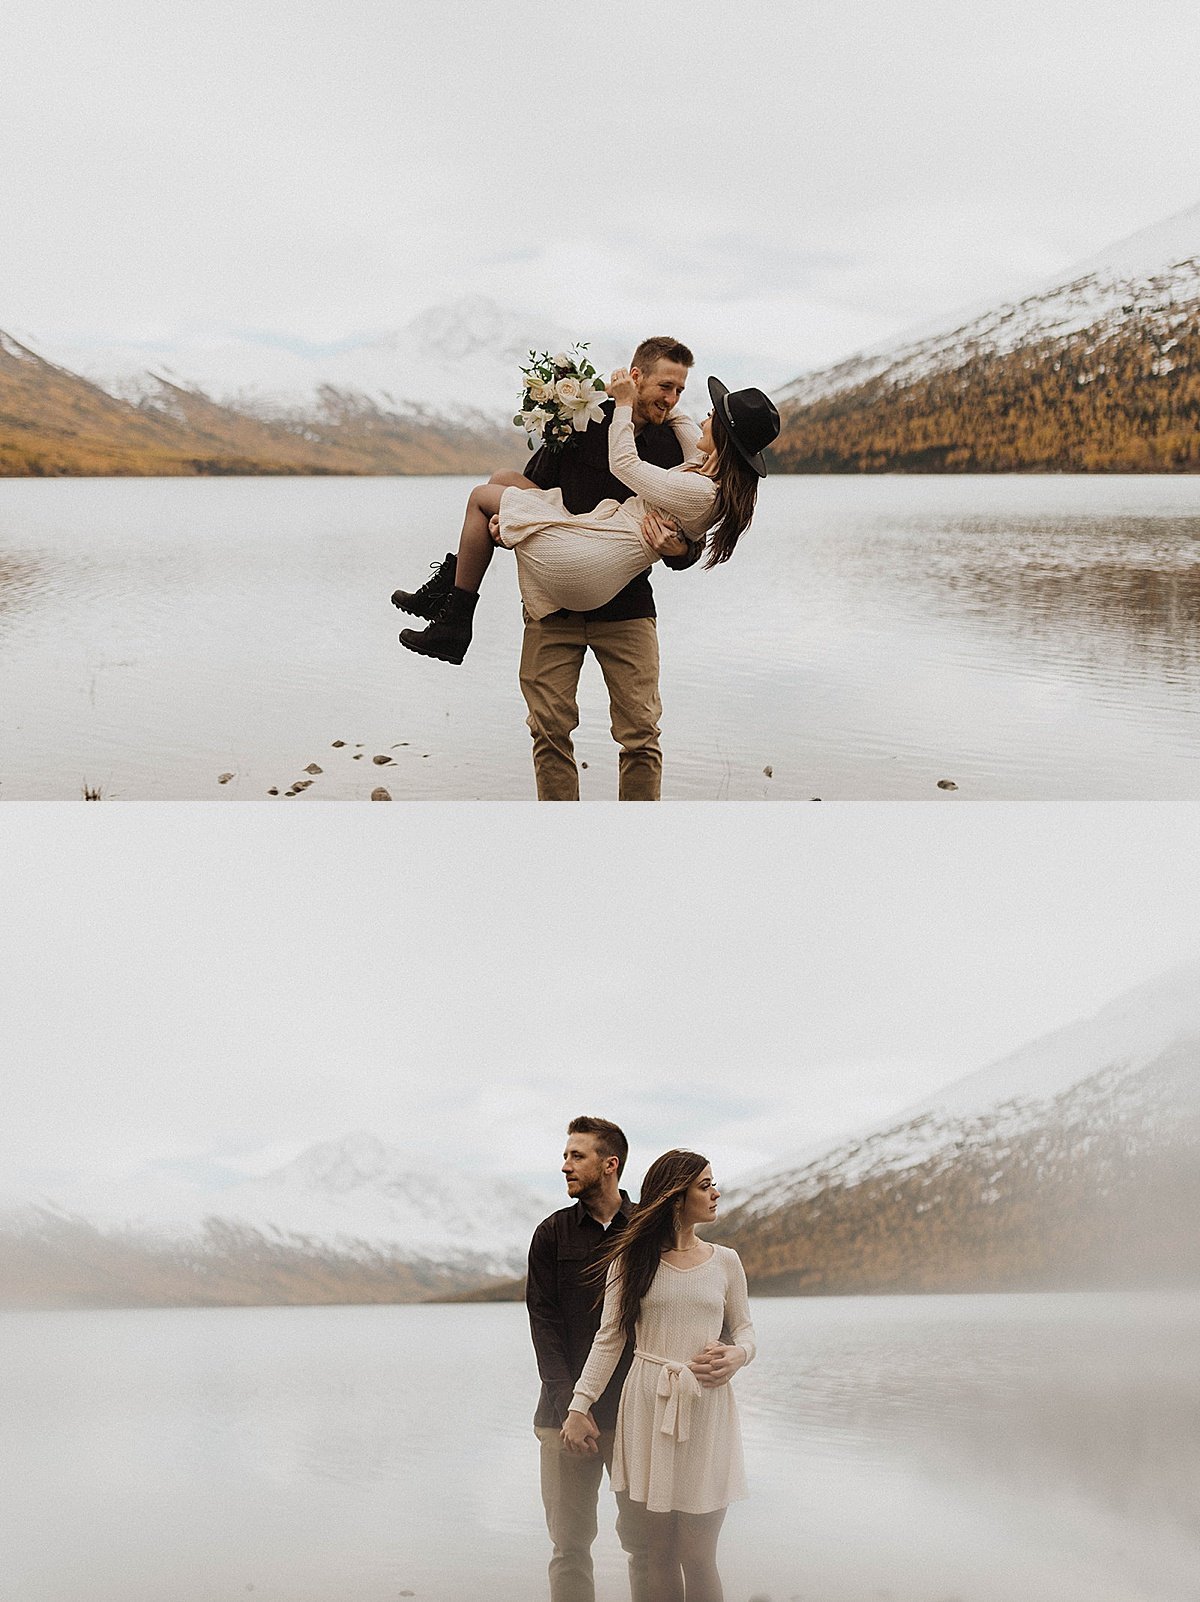  man sweeps his fiancee off her feet in front of mountain lake during autumn engagement shoot 